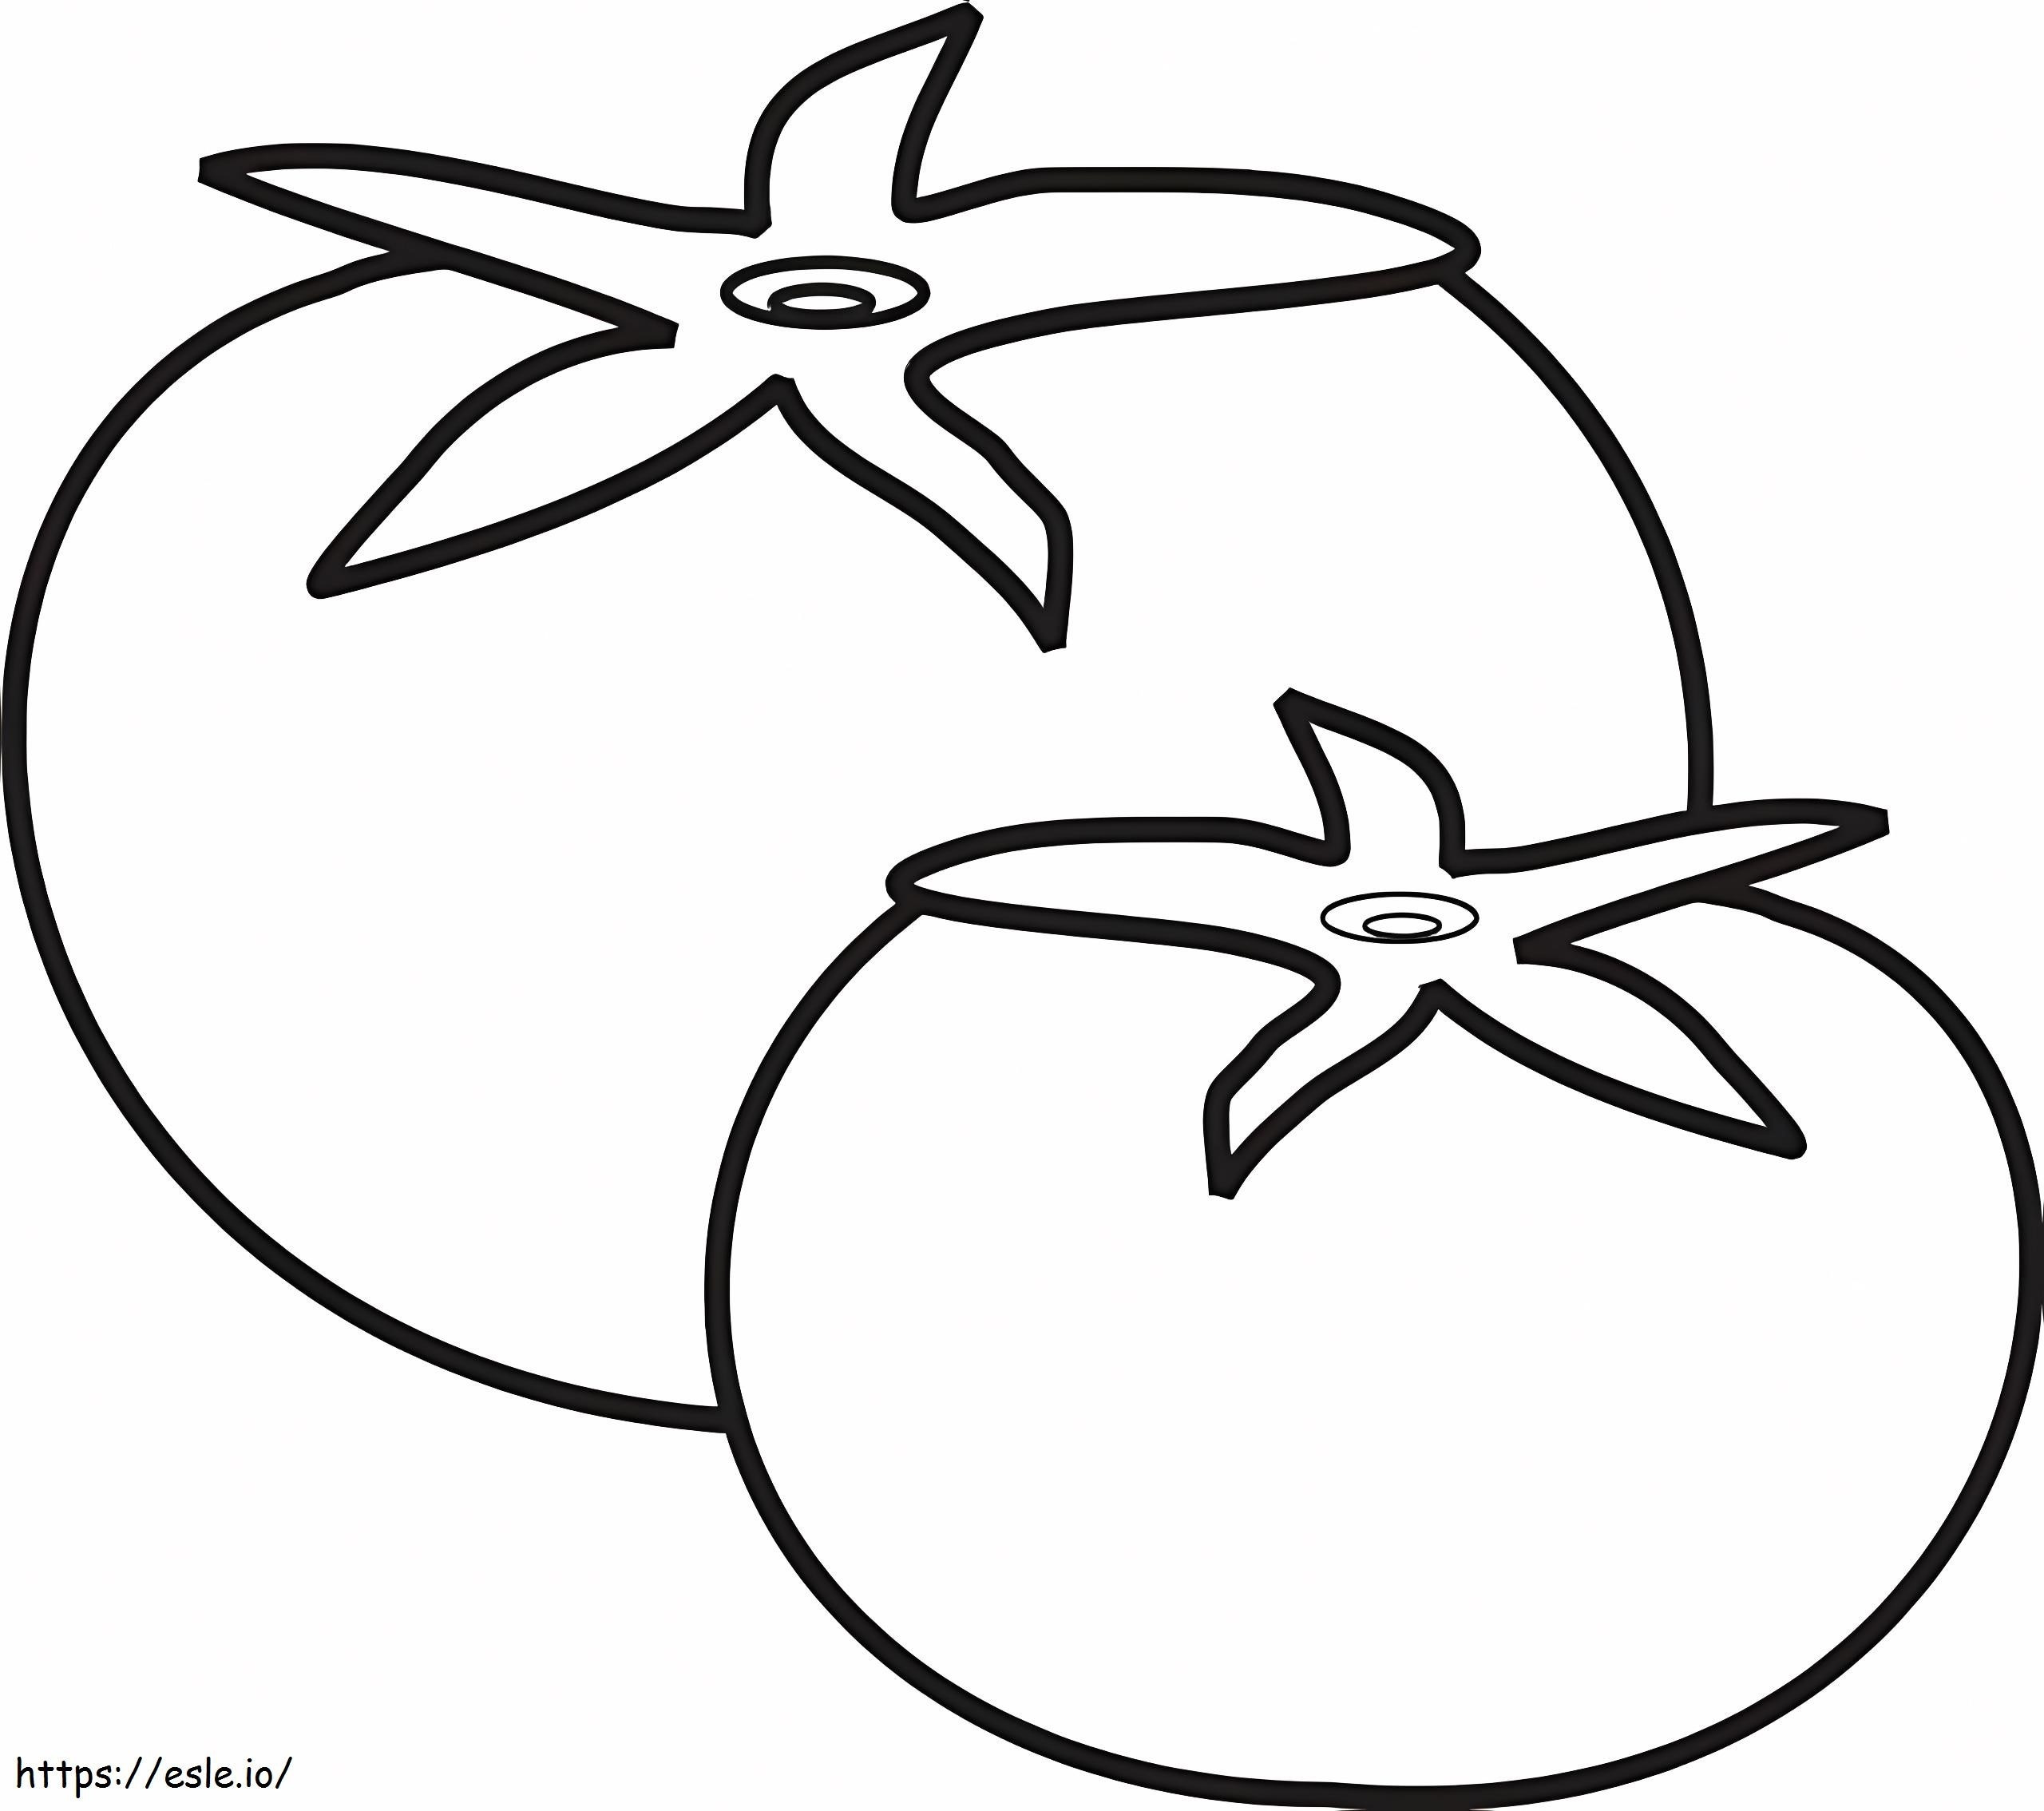 Big And Small Tomato coloring page